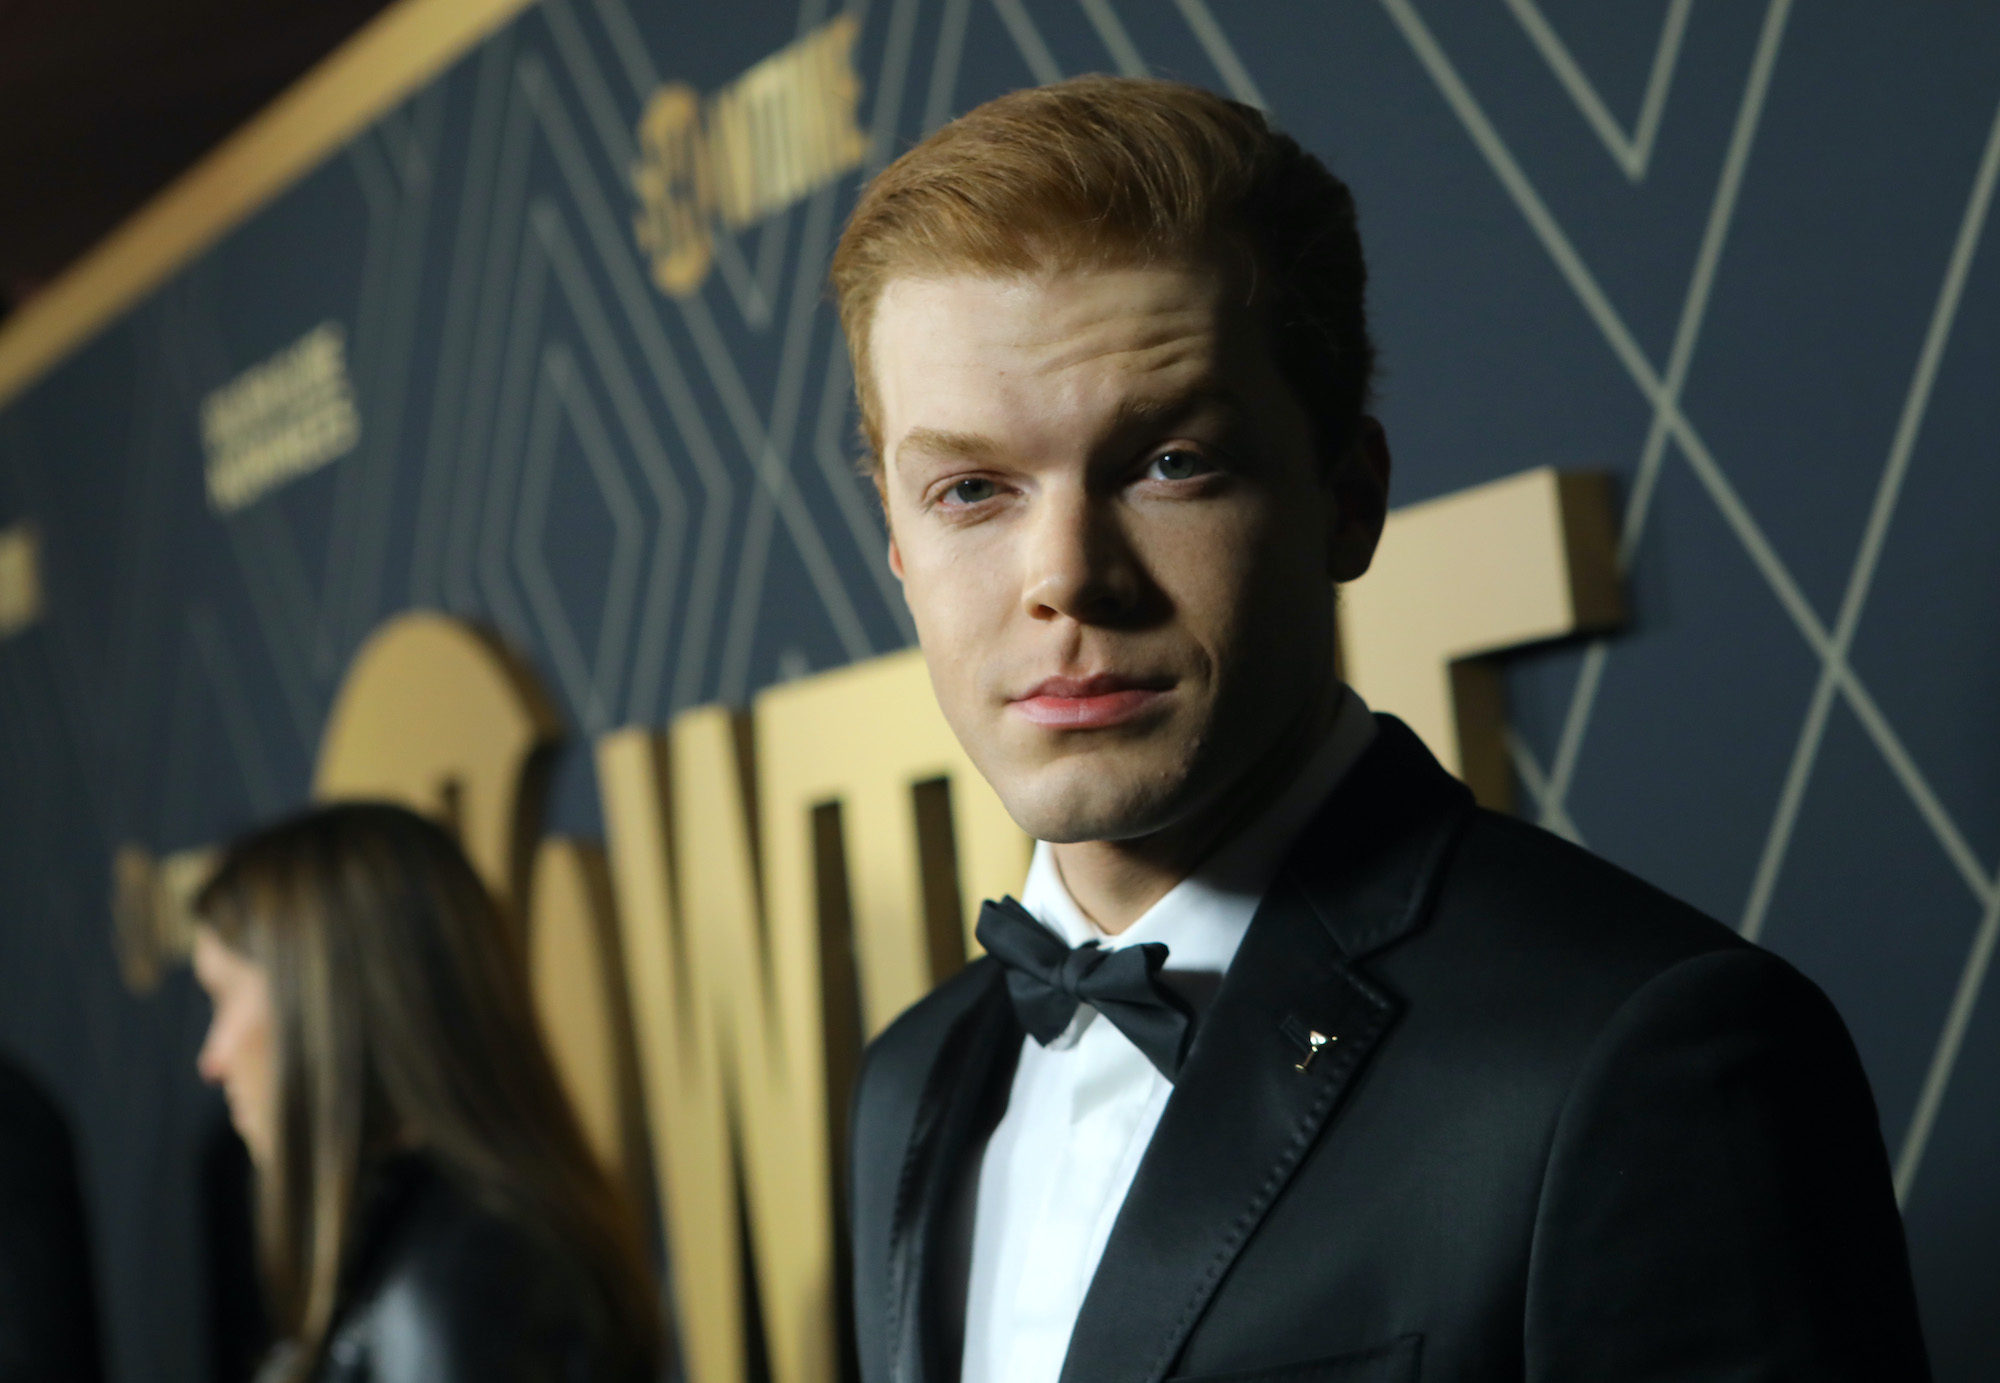 'The Mandalorian' Could Cameron Monaghan Make His First 'Star Wars